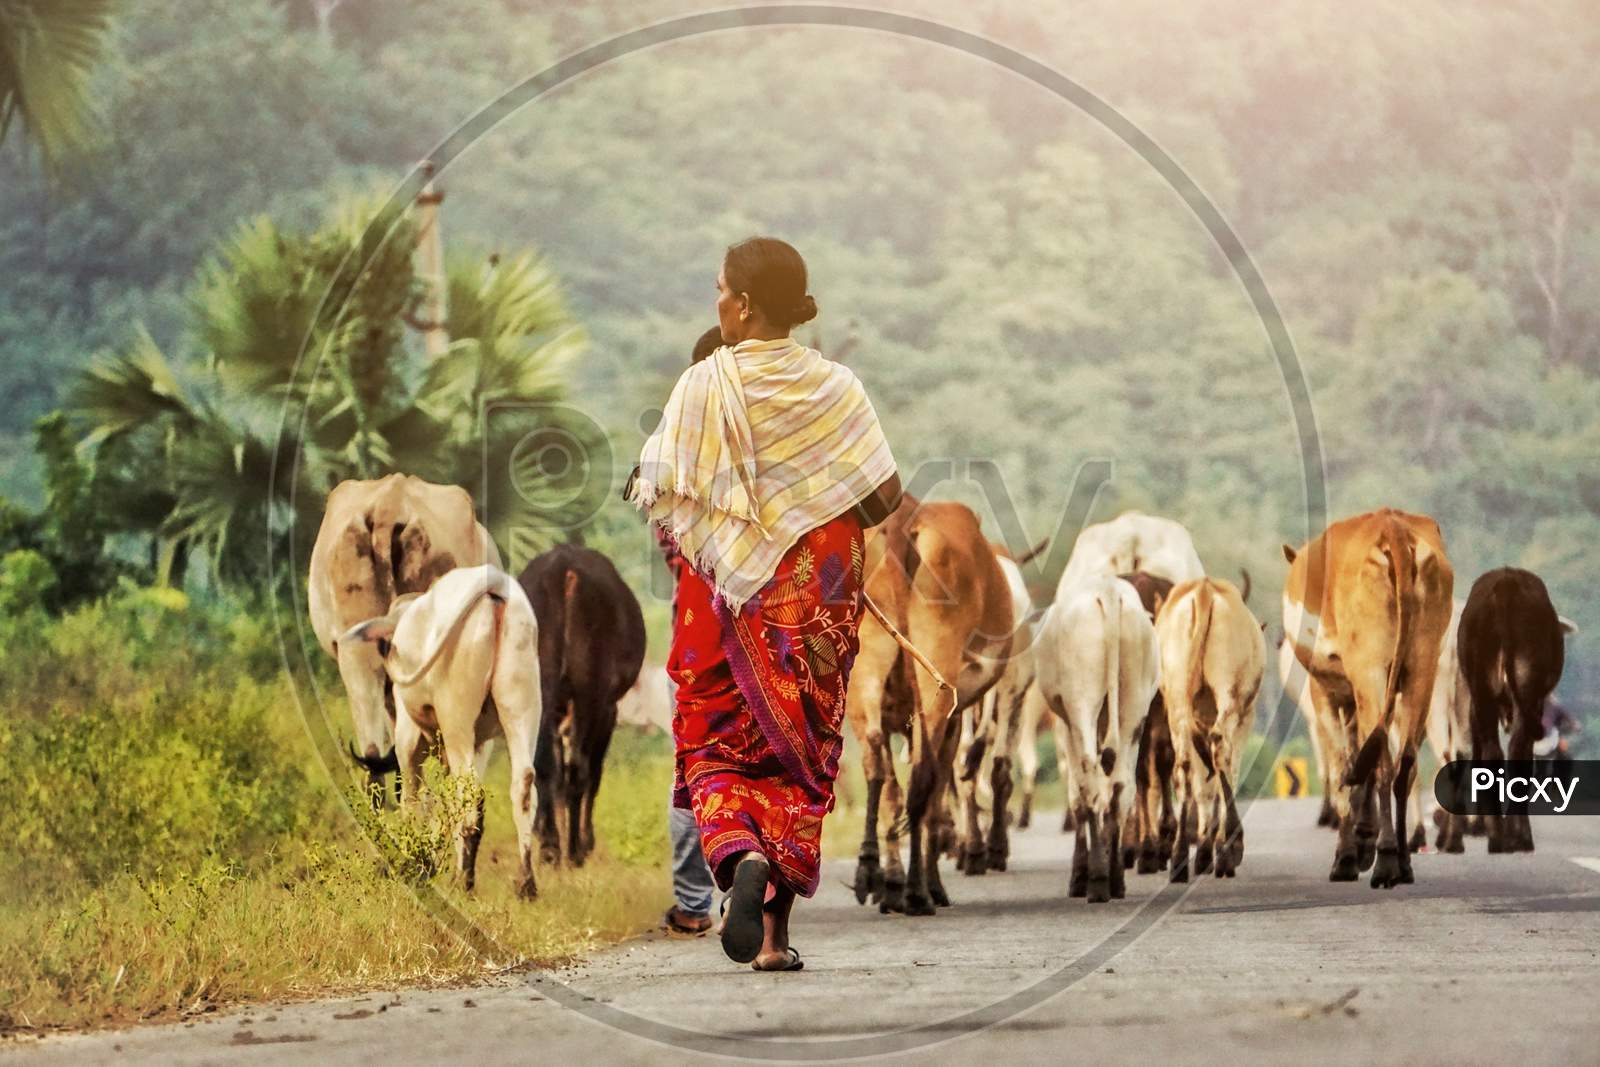 Natural photograph. Women taking care of Cattle.